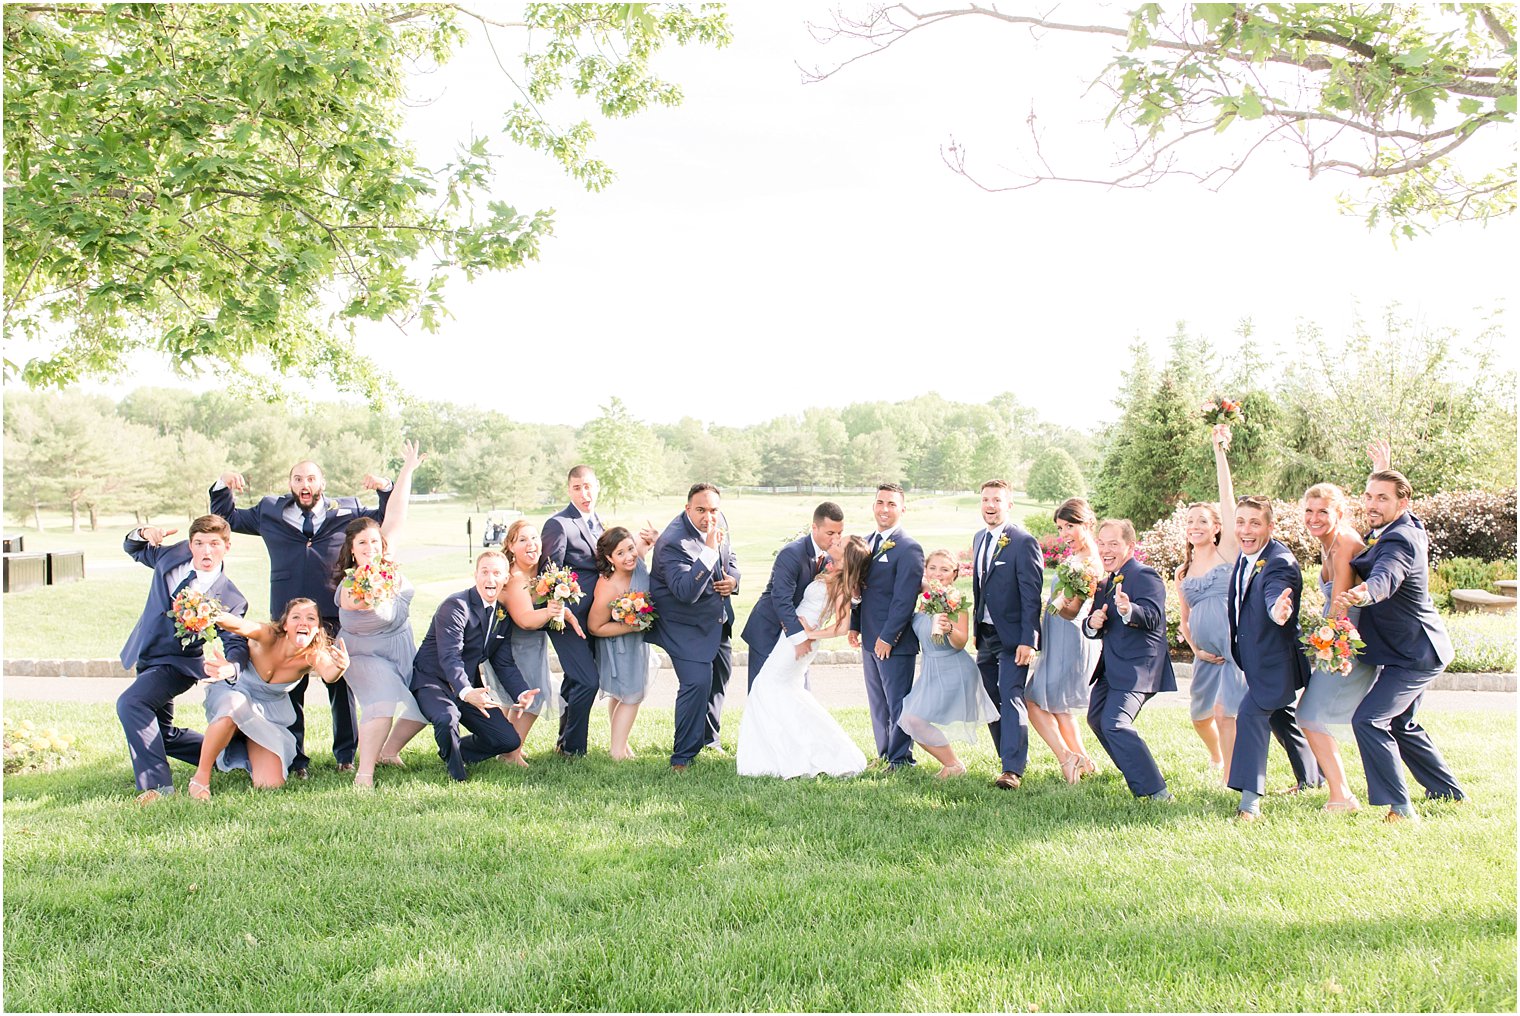 Dusty blue and navy bridal party